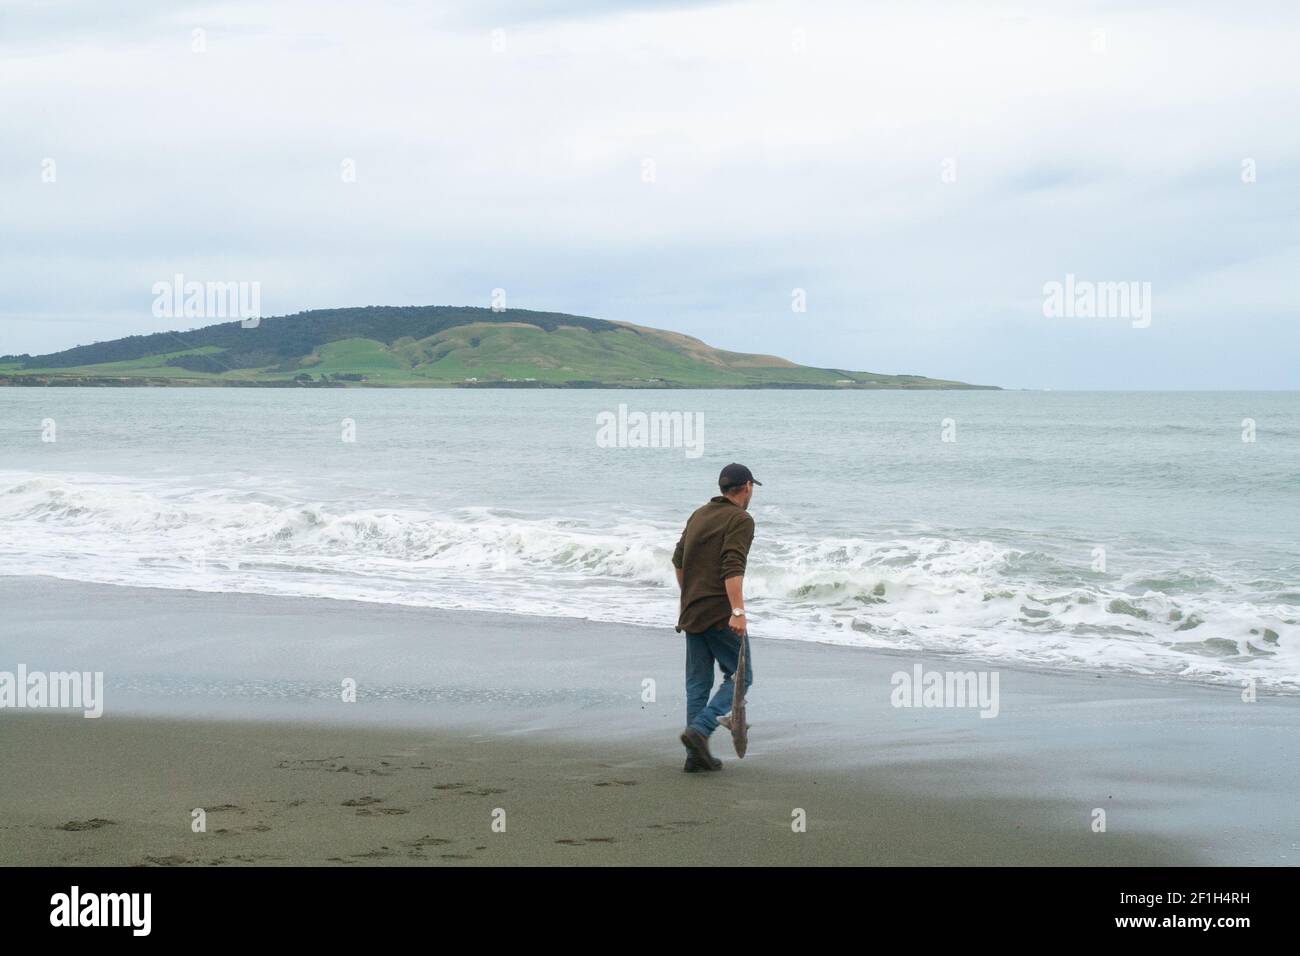 Fisherman with shark fish getting to throw it back to the ocean, Gemstone beach of the Southern Pacific Ocean, Te Waewae Bay with view of Pahia hill Stock Photo